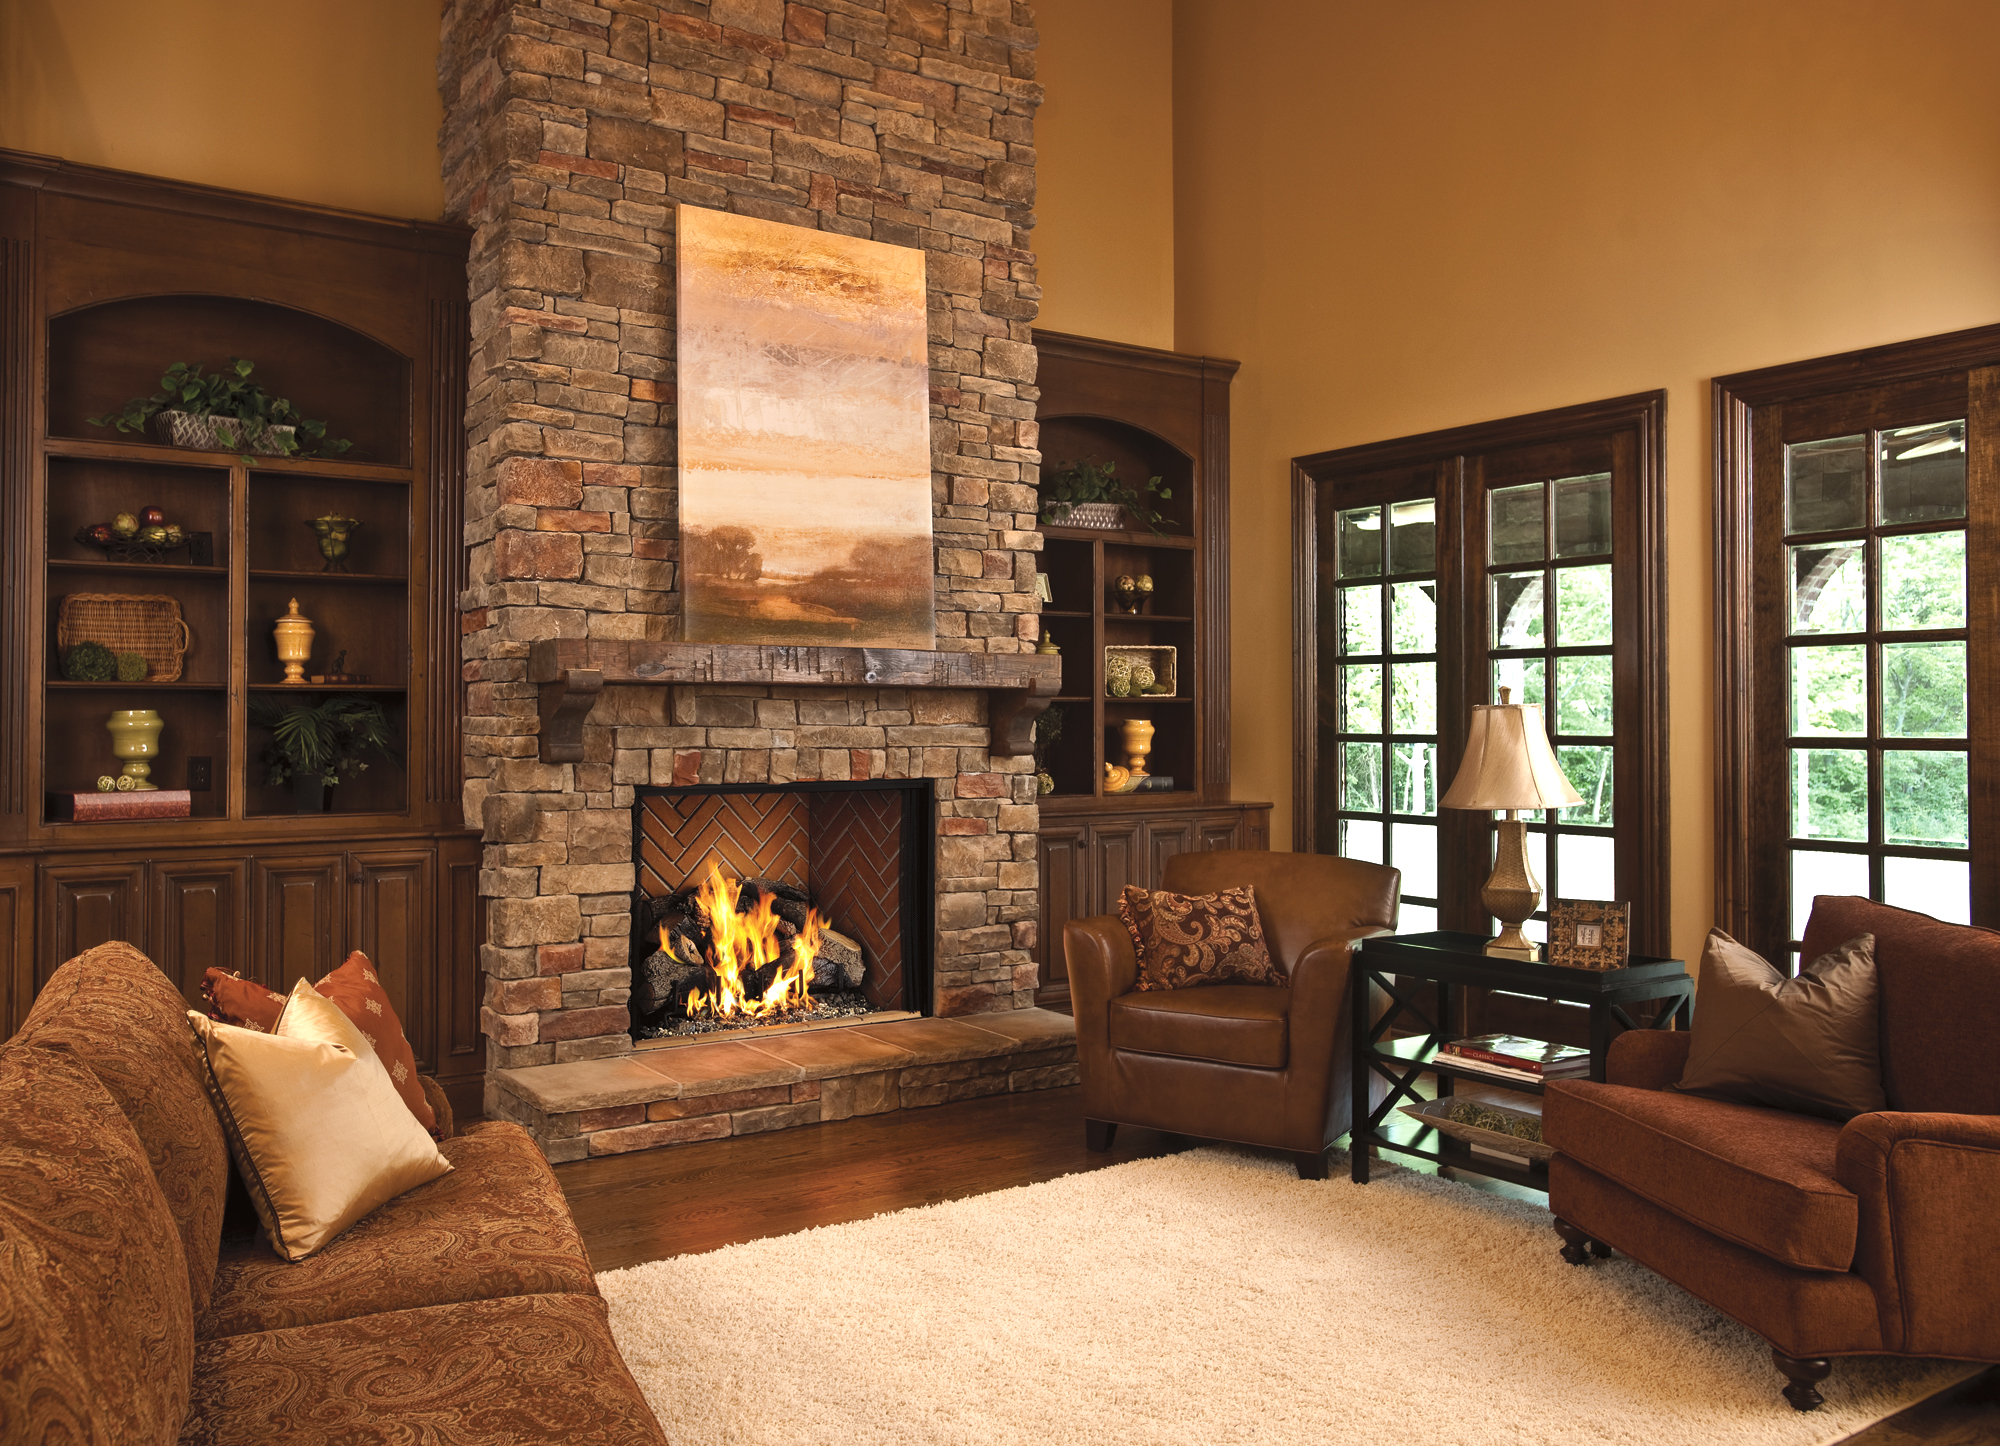 Real Fyre gas fireplace insert in a stone fireplace